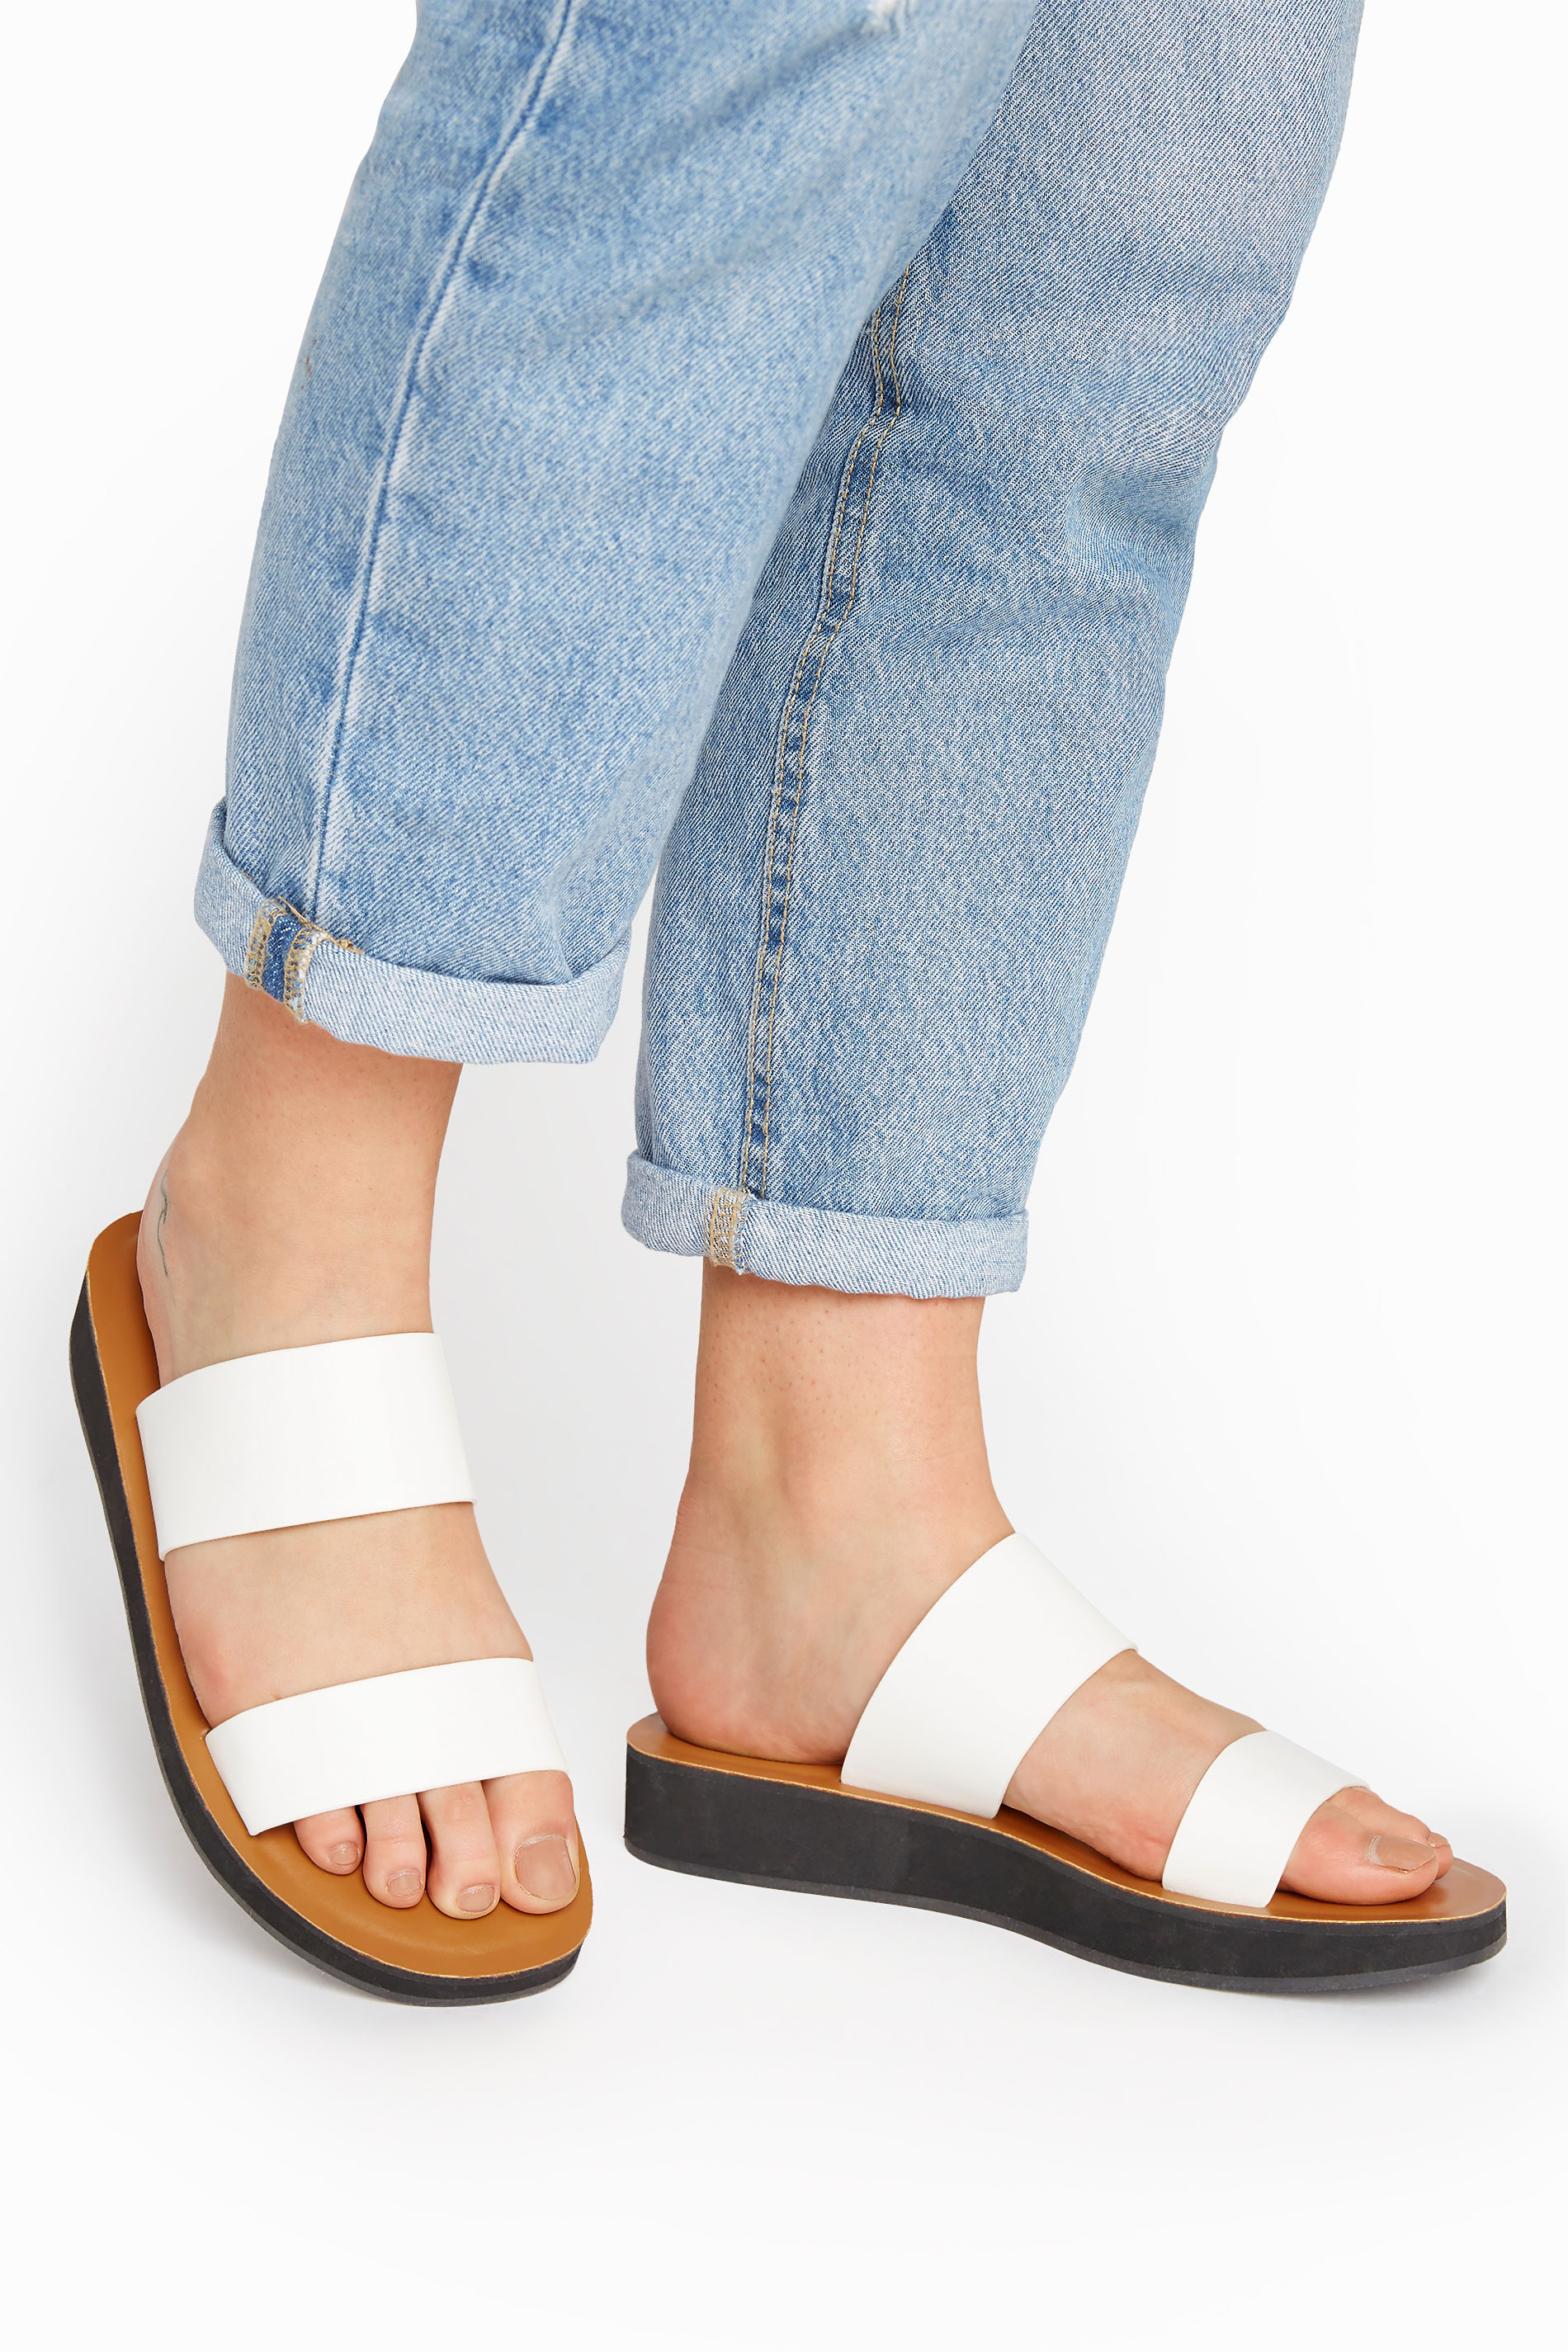 LTS White Two Strap Flat Sandals In Standard D Fit | Long Tall Sally 1